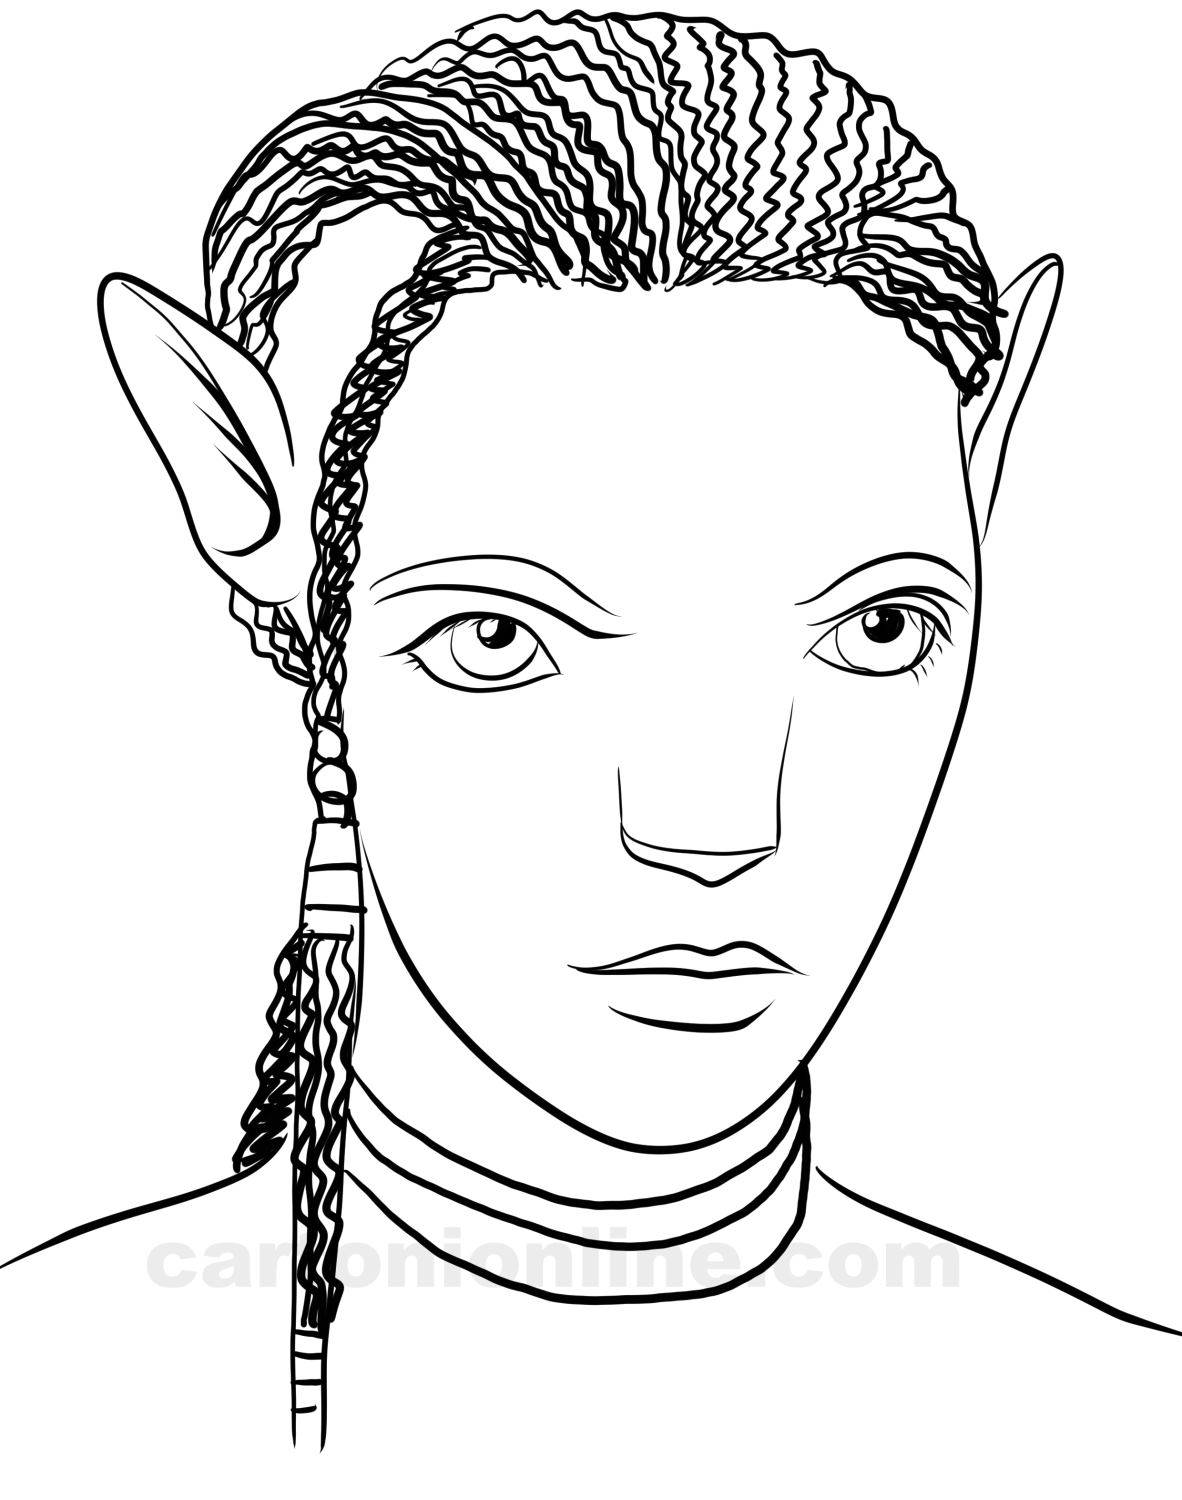 Jake Sully - Avatar 2  coloring page to print and coloring